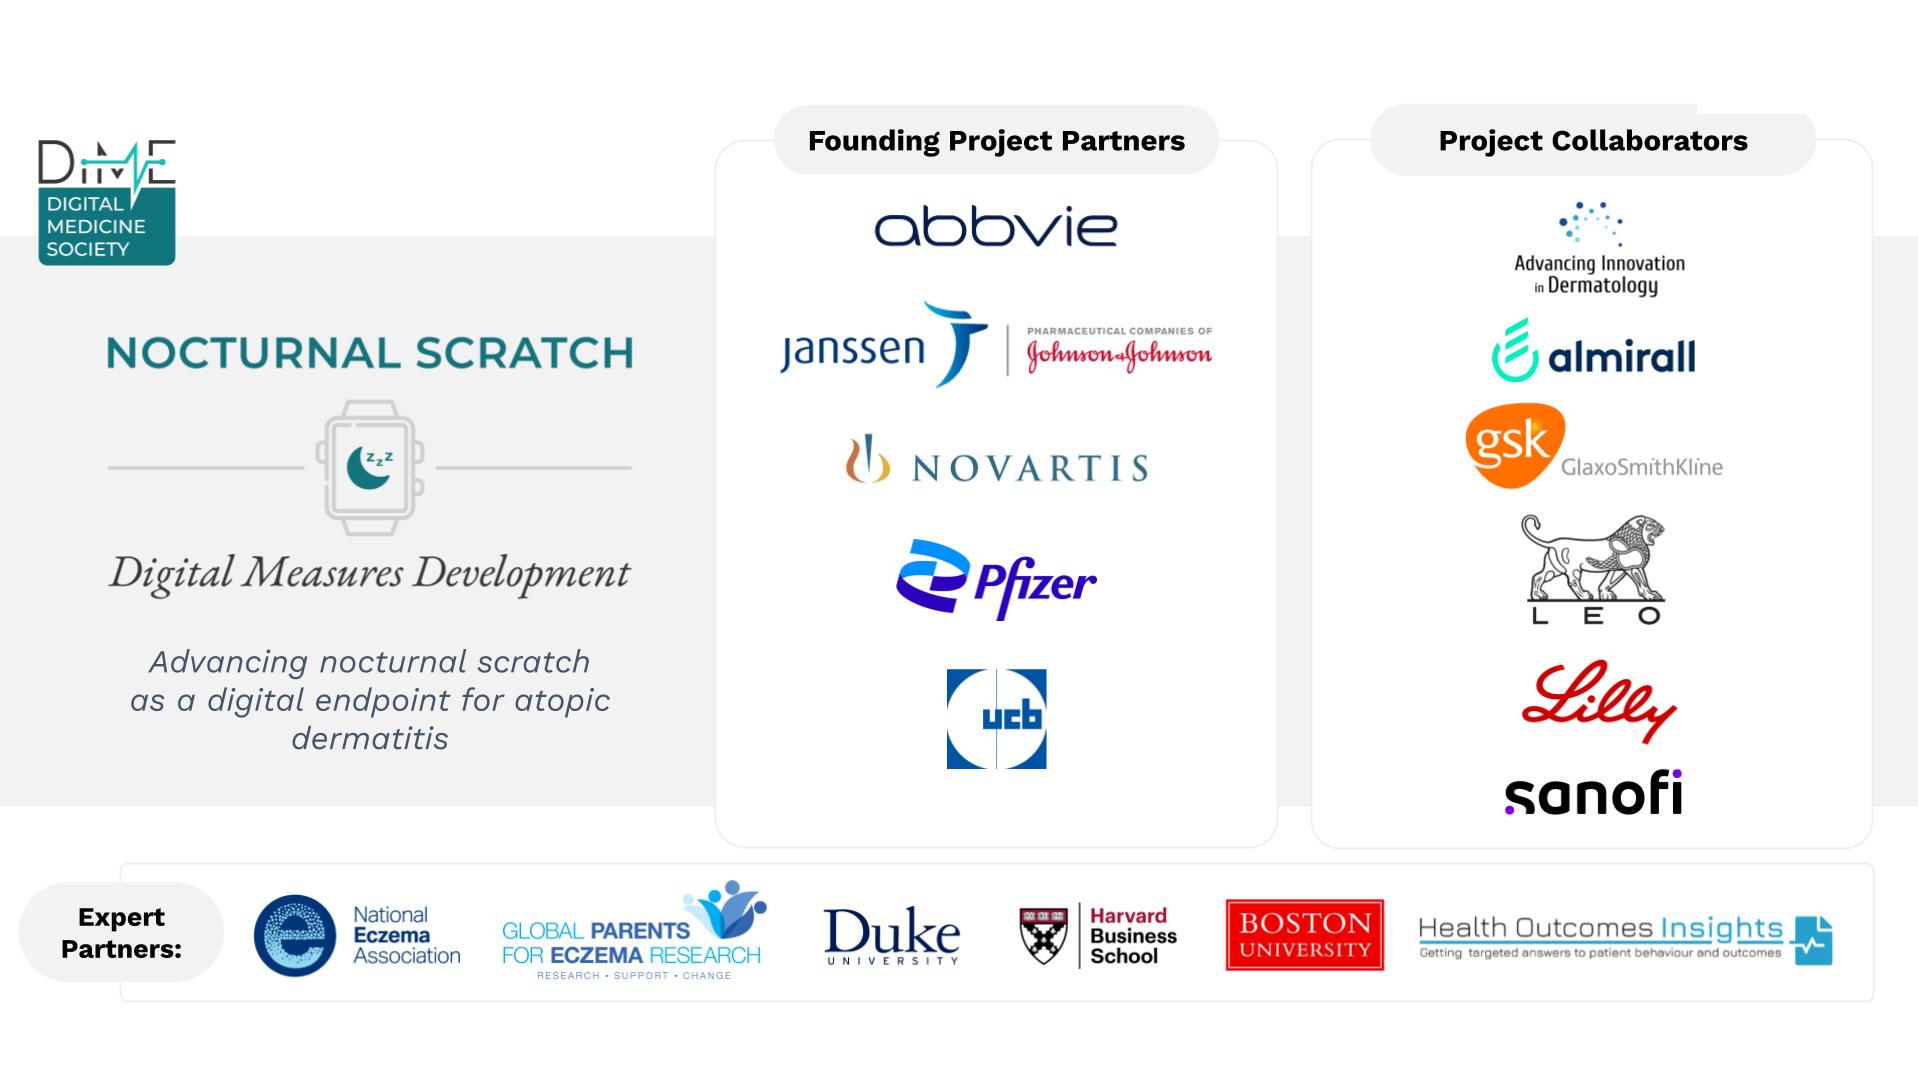 Founding Project Partners